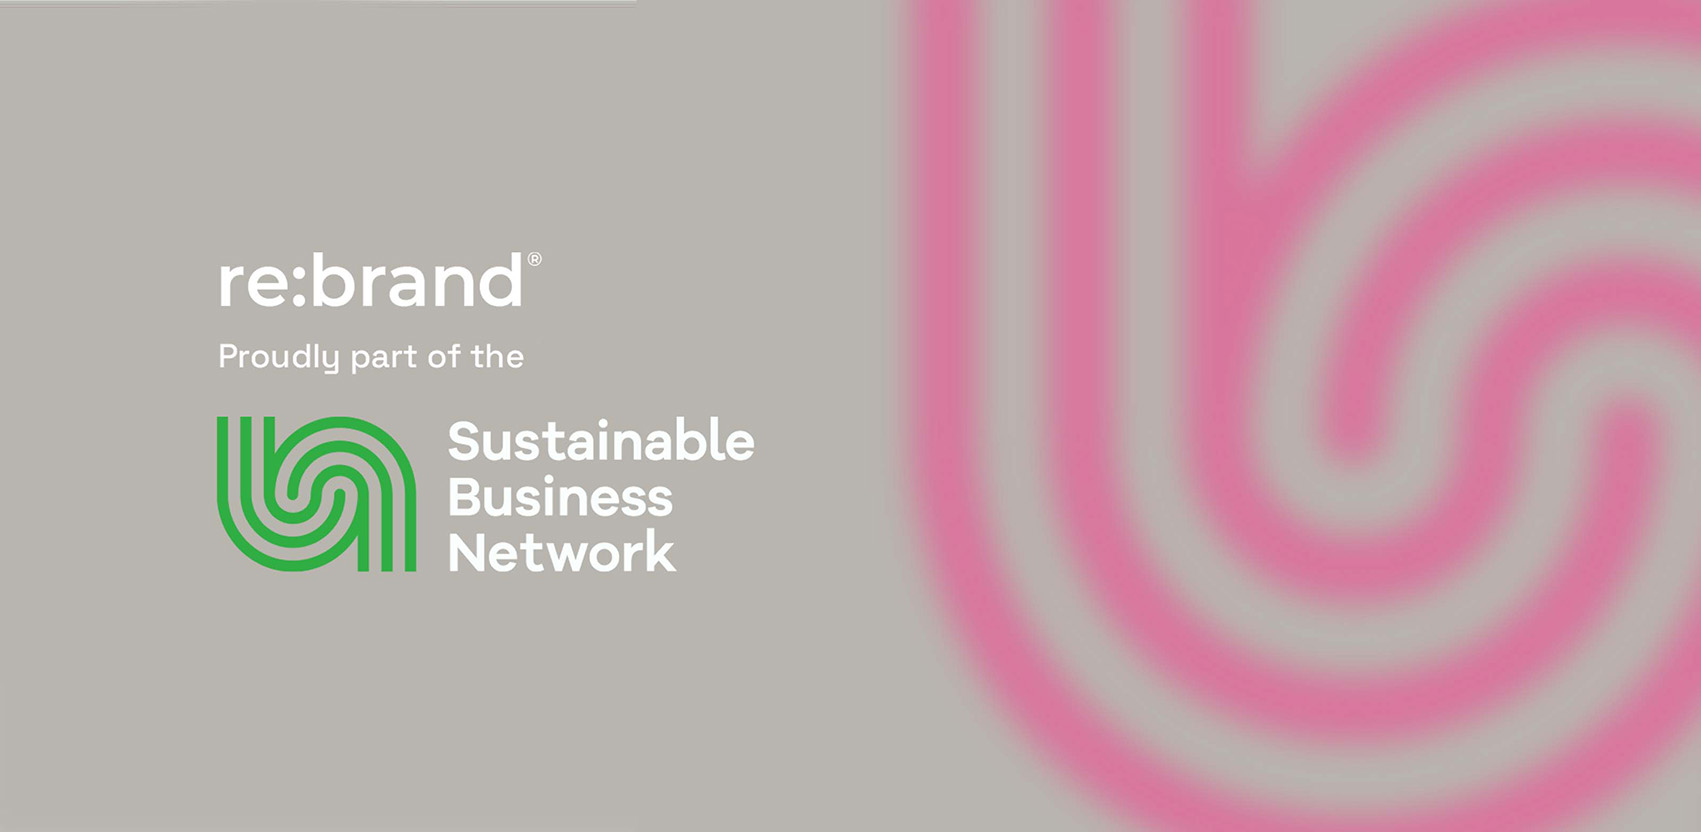 Brand Agency Auckland and Wellington is sustainable